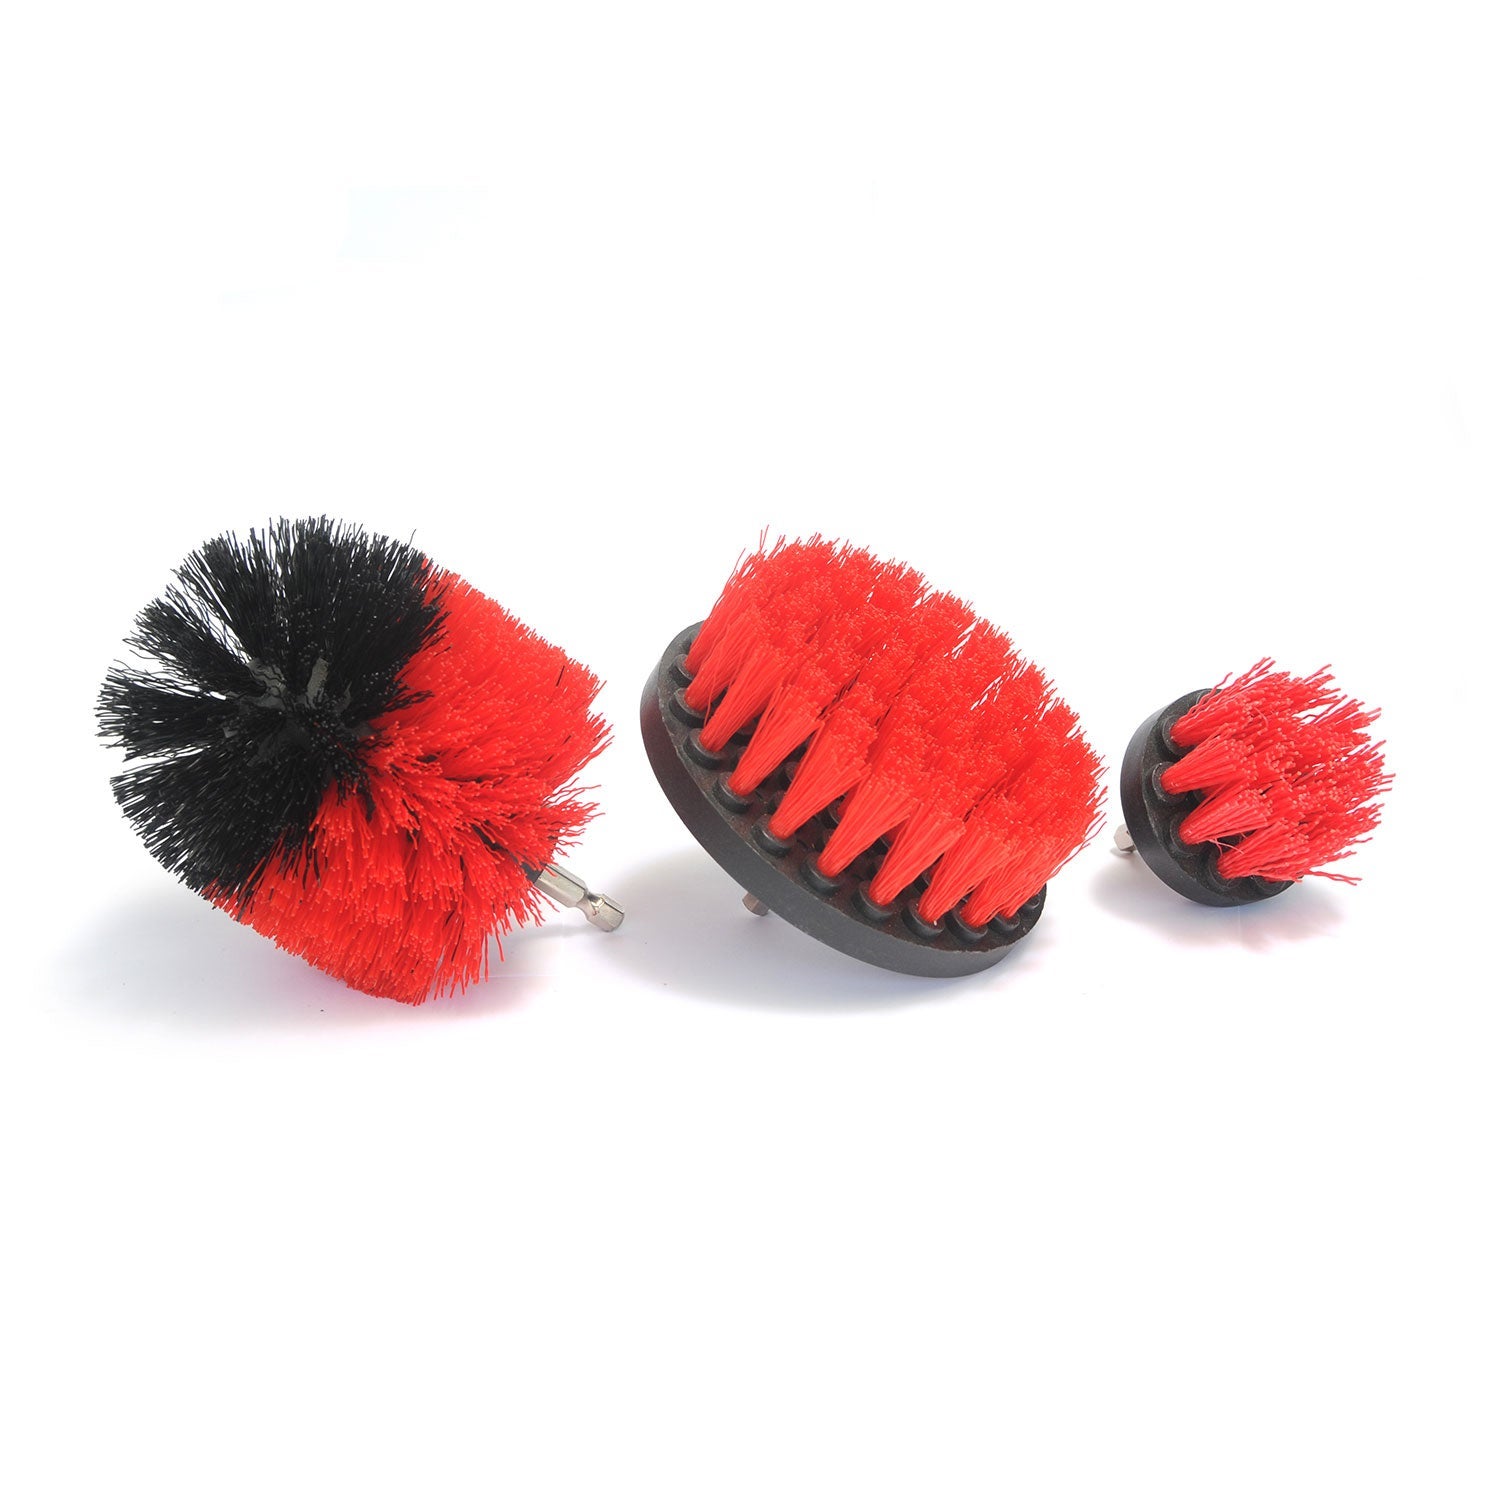 Car Cleaning Premium Drill Mounted Brushes (3 Piece)